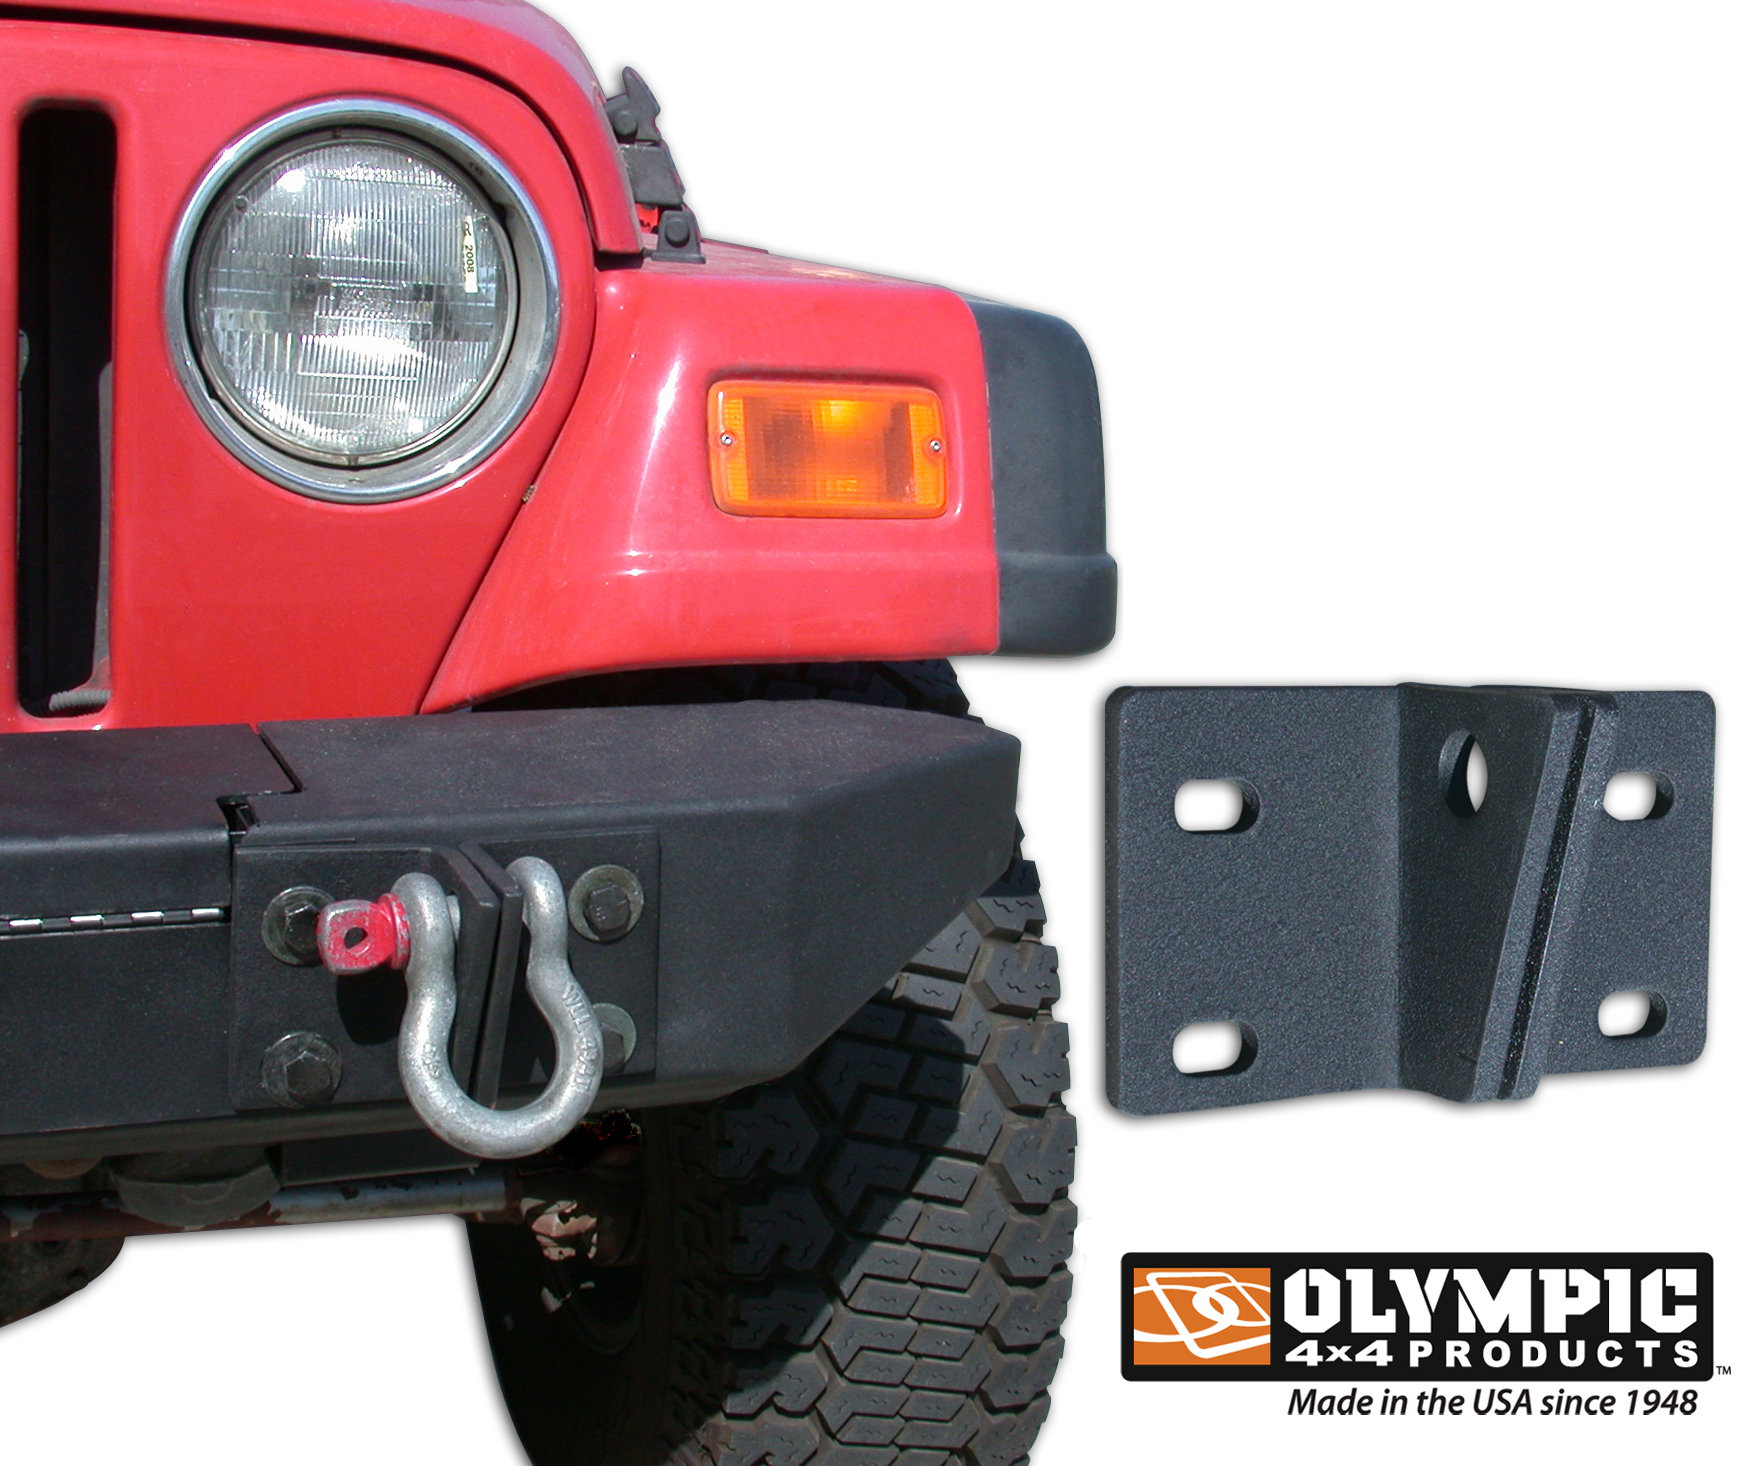 Olympic 4x4 Products 12001 2921 D-Ring Brackets for 07-18 Jeep Wrangler JK  & Wrangler Unlimited JK | Quadratec